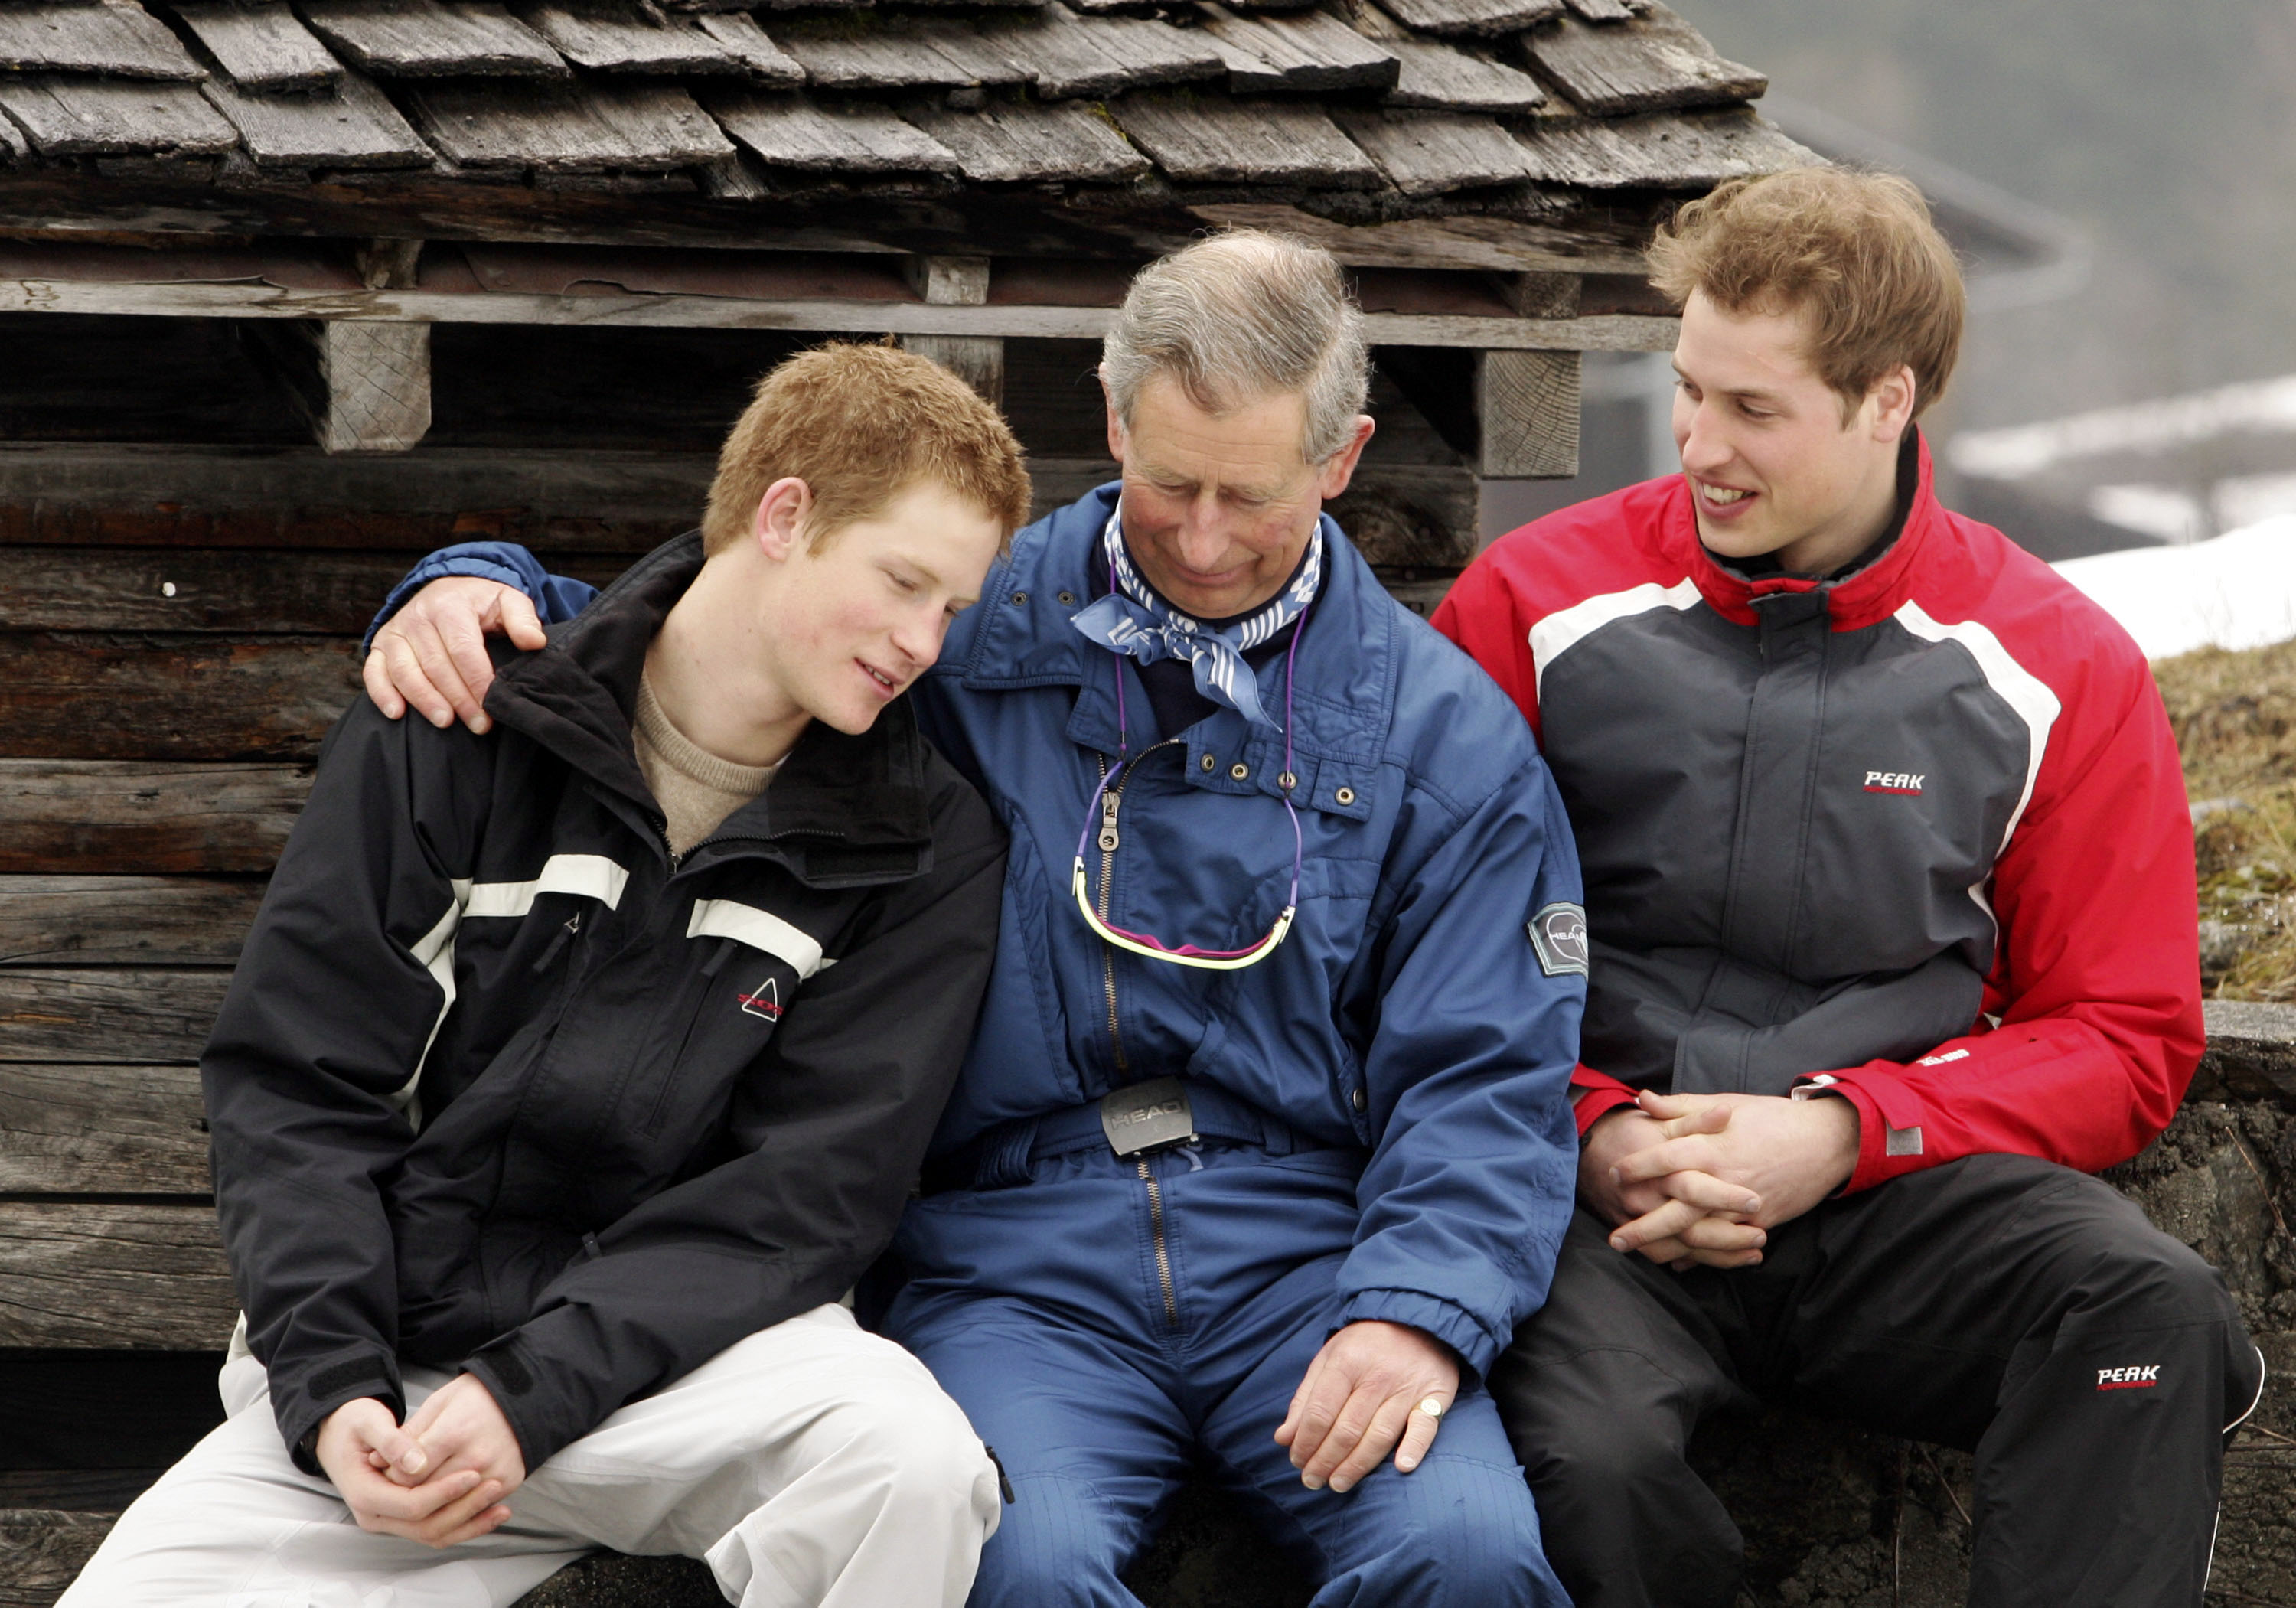 Prince Harry, King Charles III and Prince William during the Royal Family's ski break at Klosters on March 31, 2005 in Switzerland. | Source: Getty Images